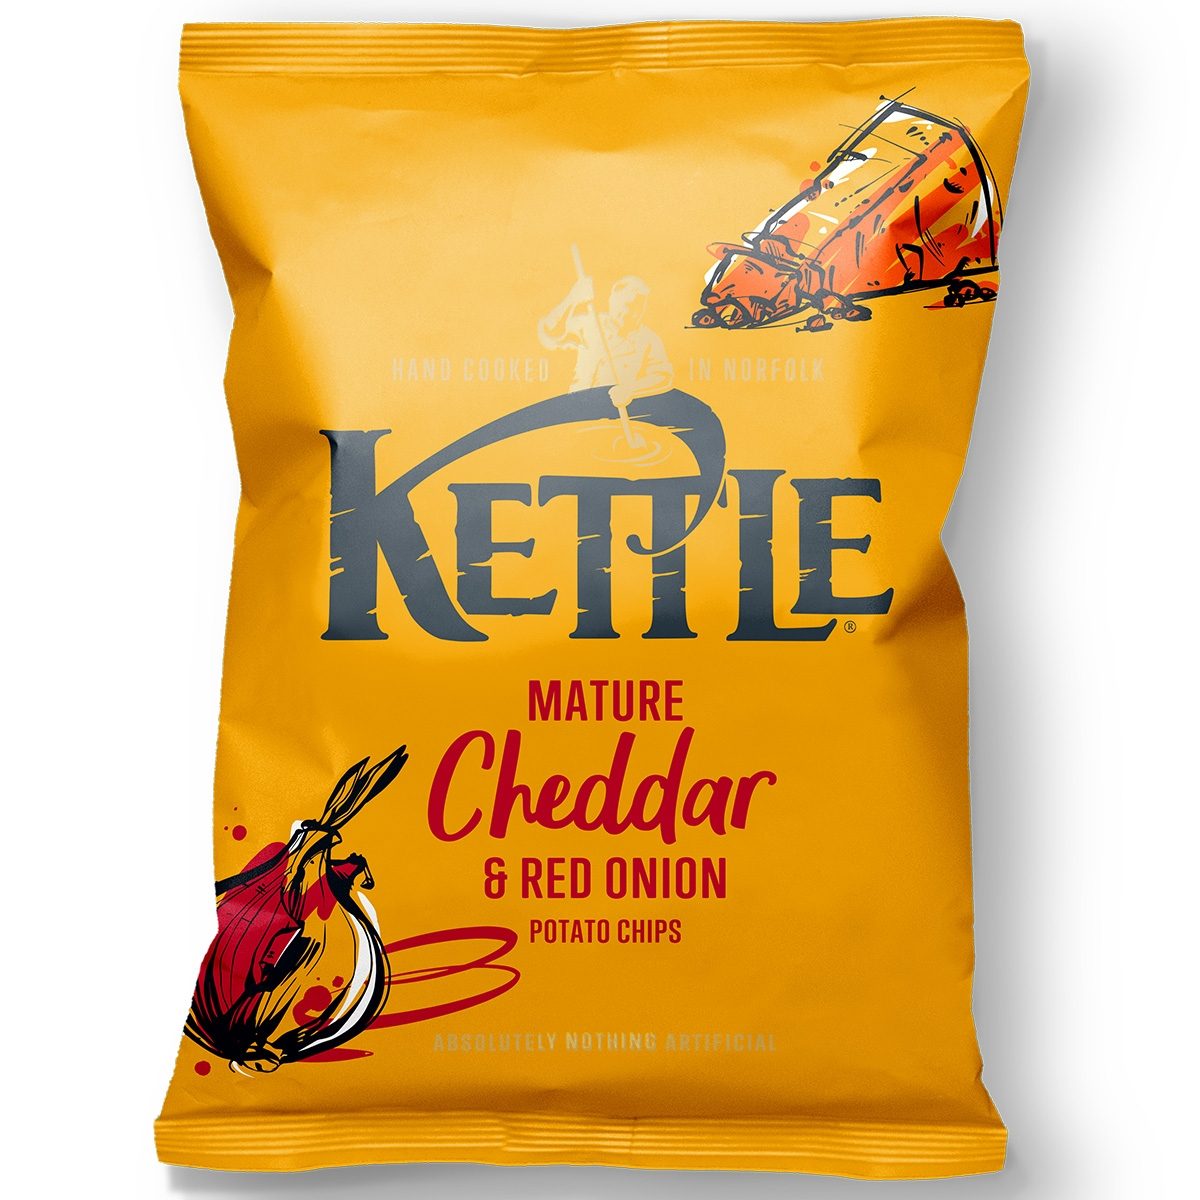 Kettle Chips - Mature Cheddar & Red Onion (12x130g) - Auguste Noel Ltd